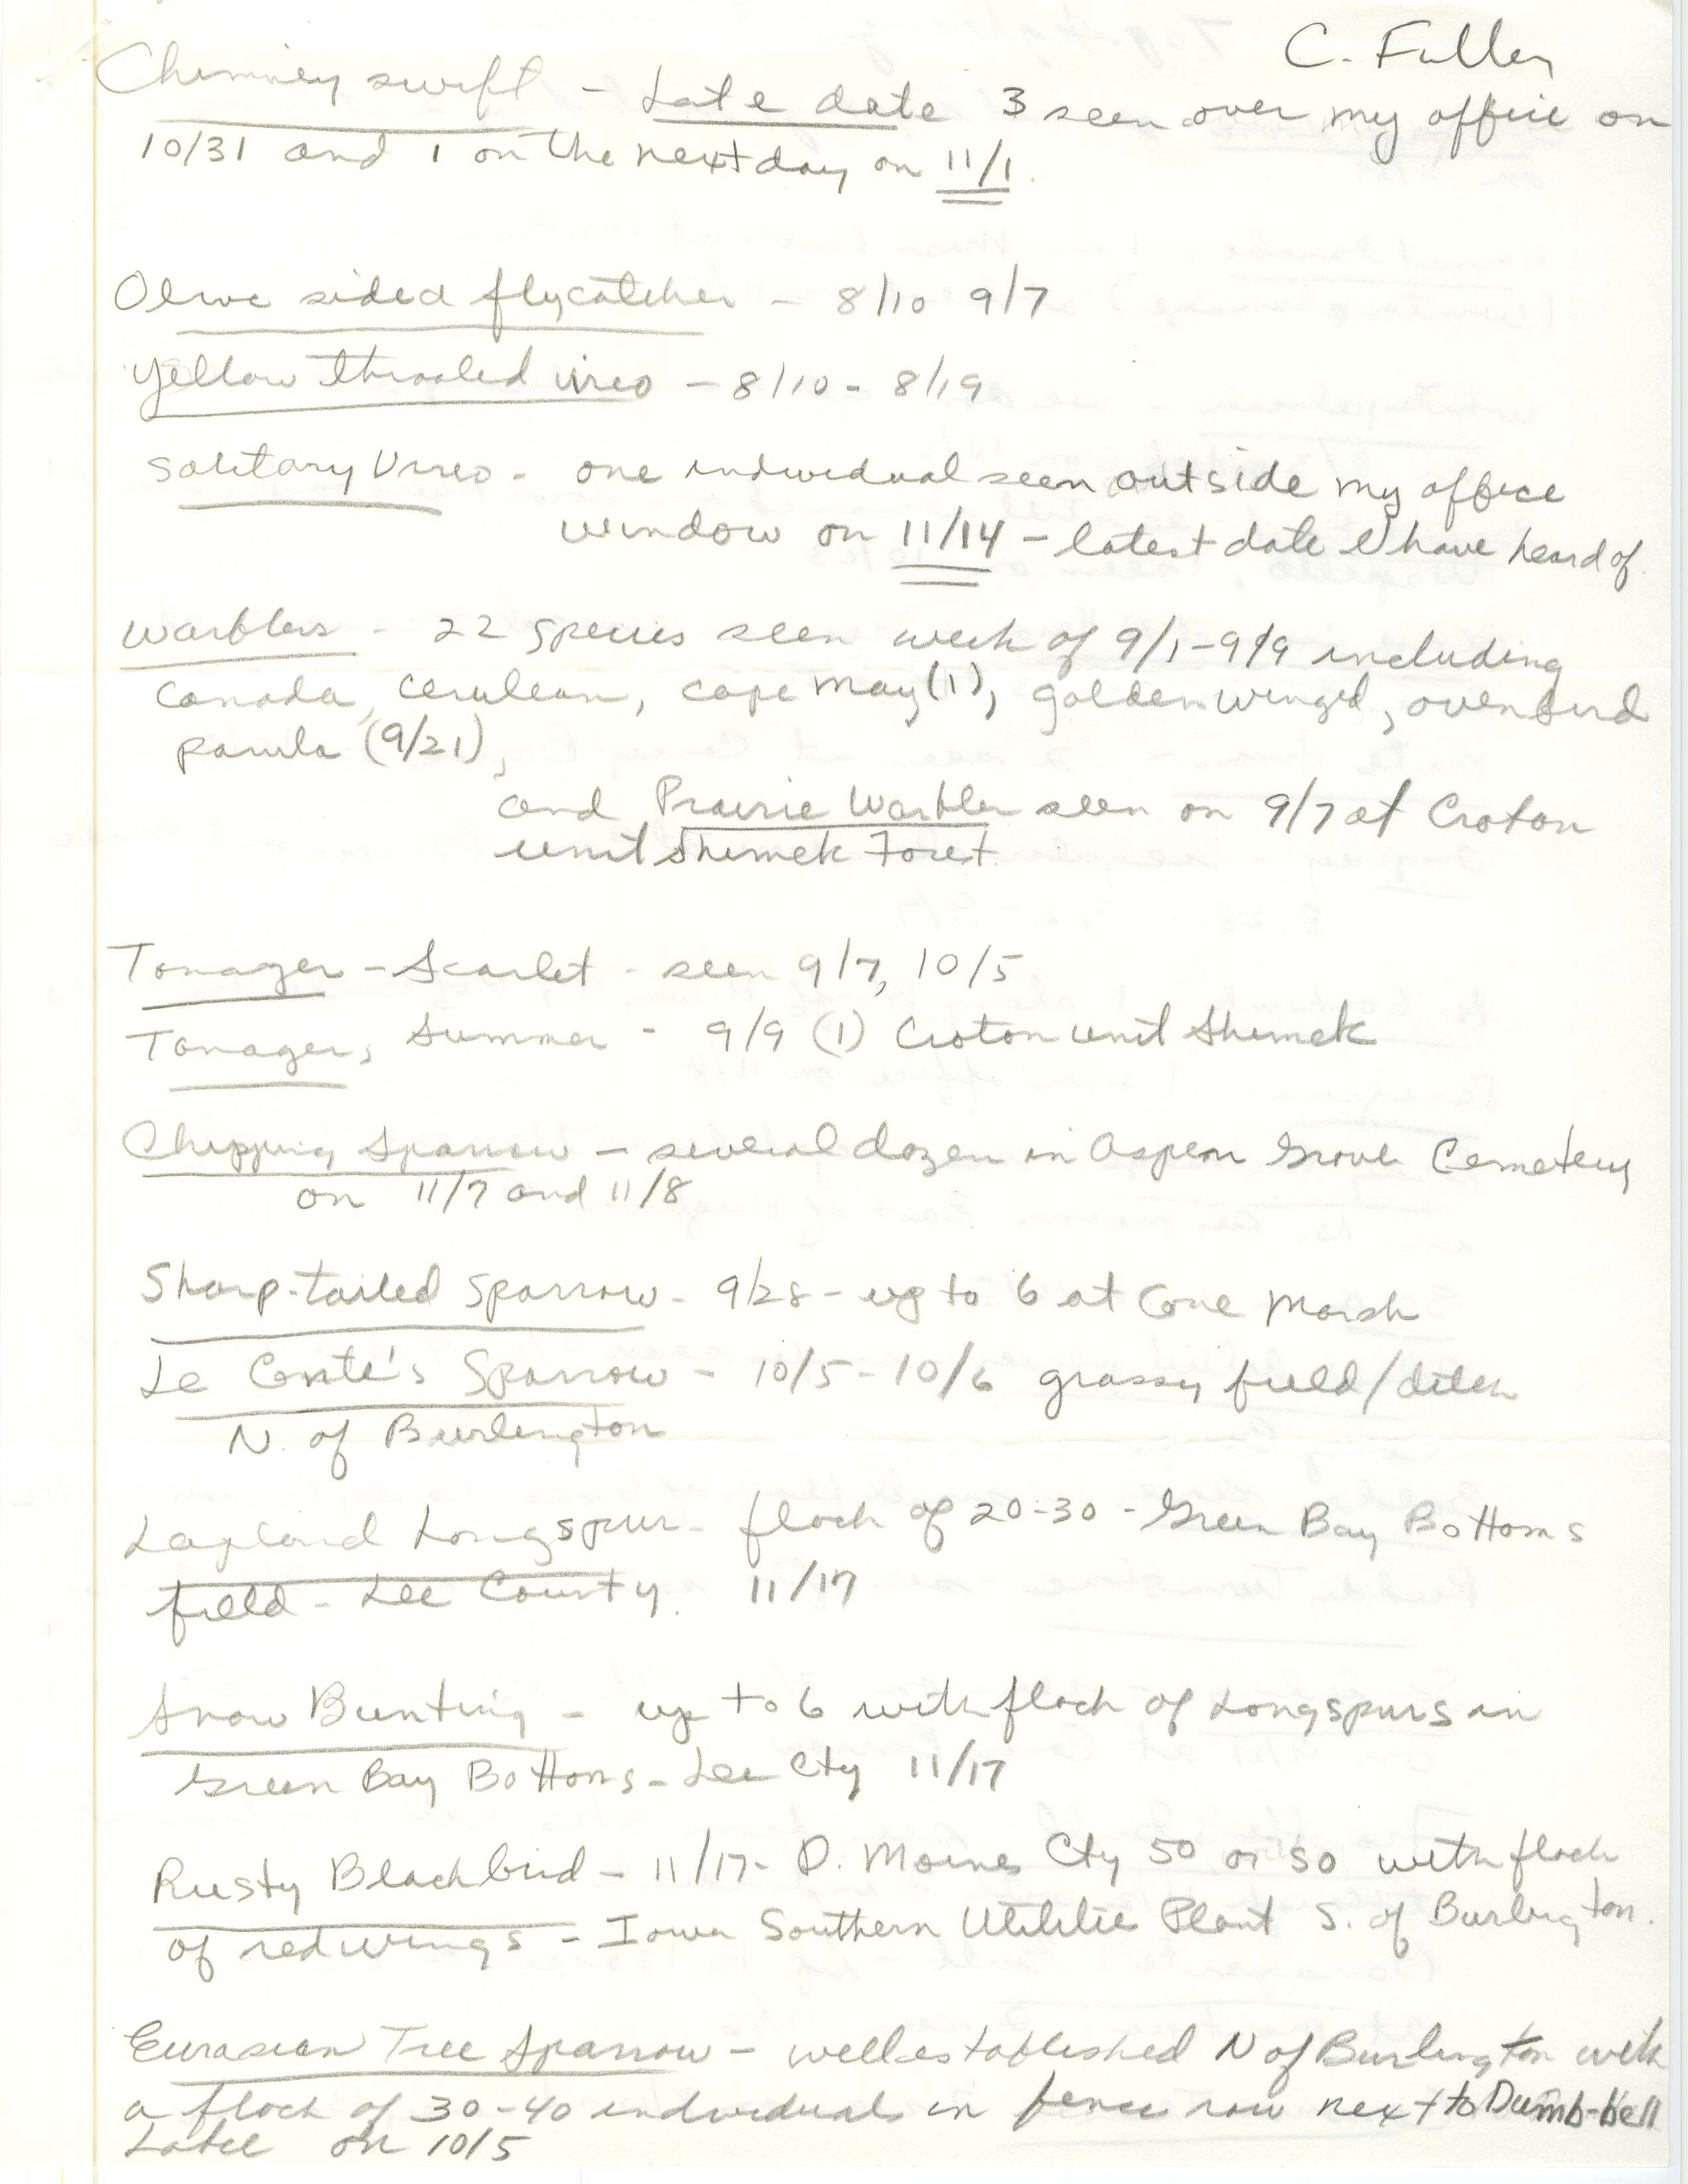 Field notes contributed by Charles Fuller, fall 1991